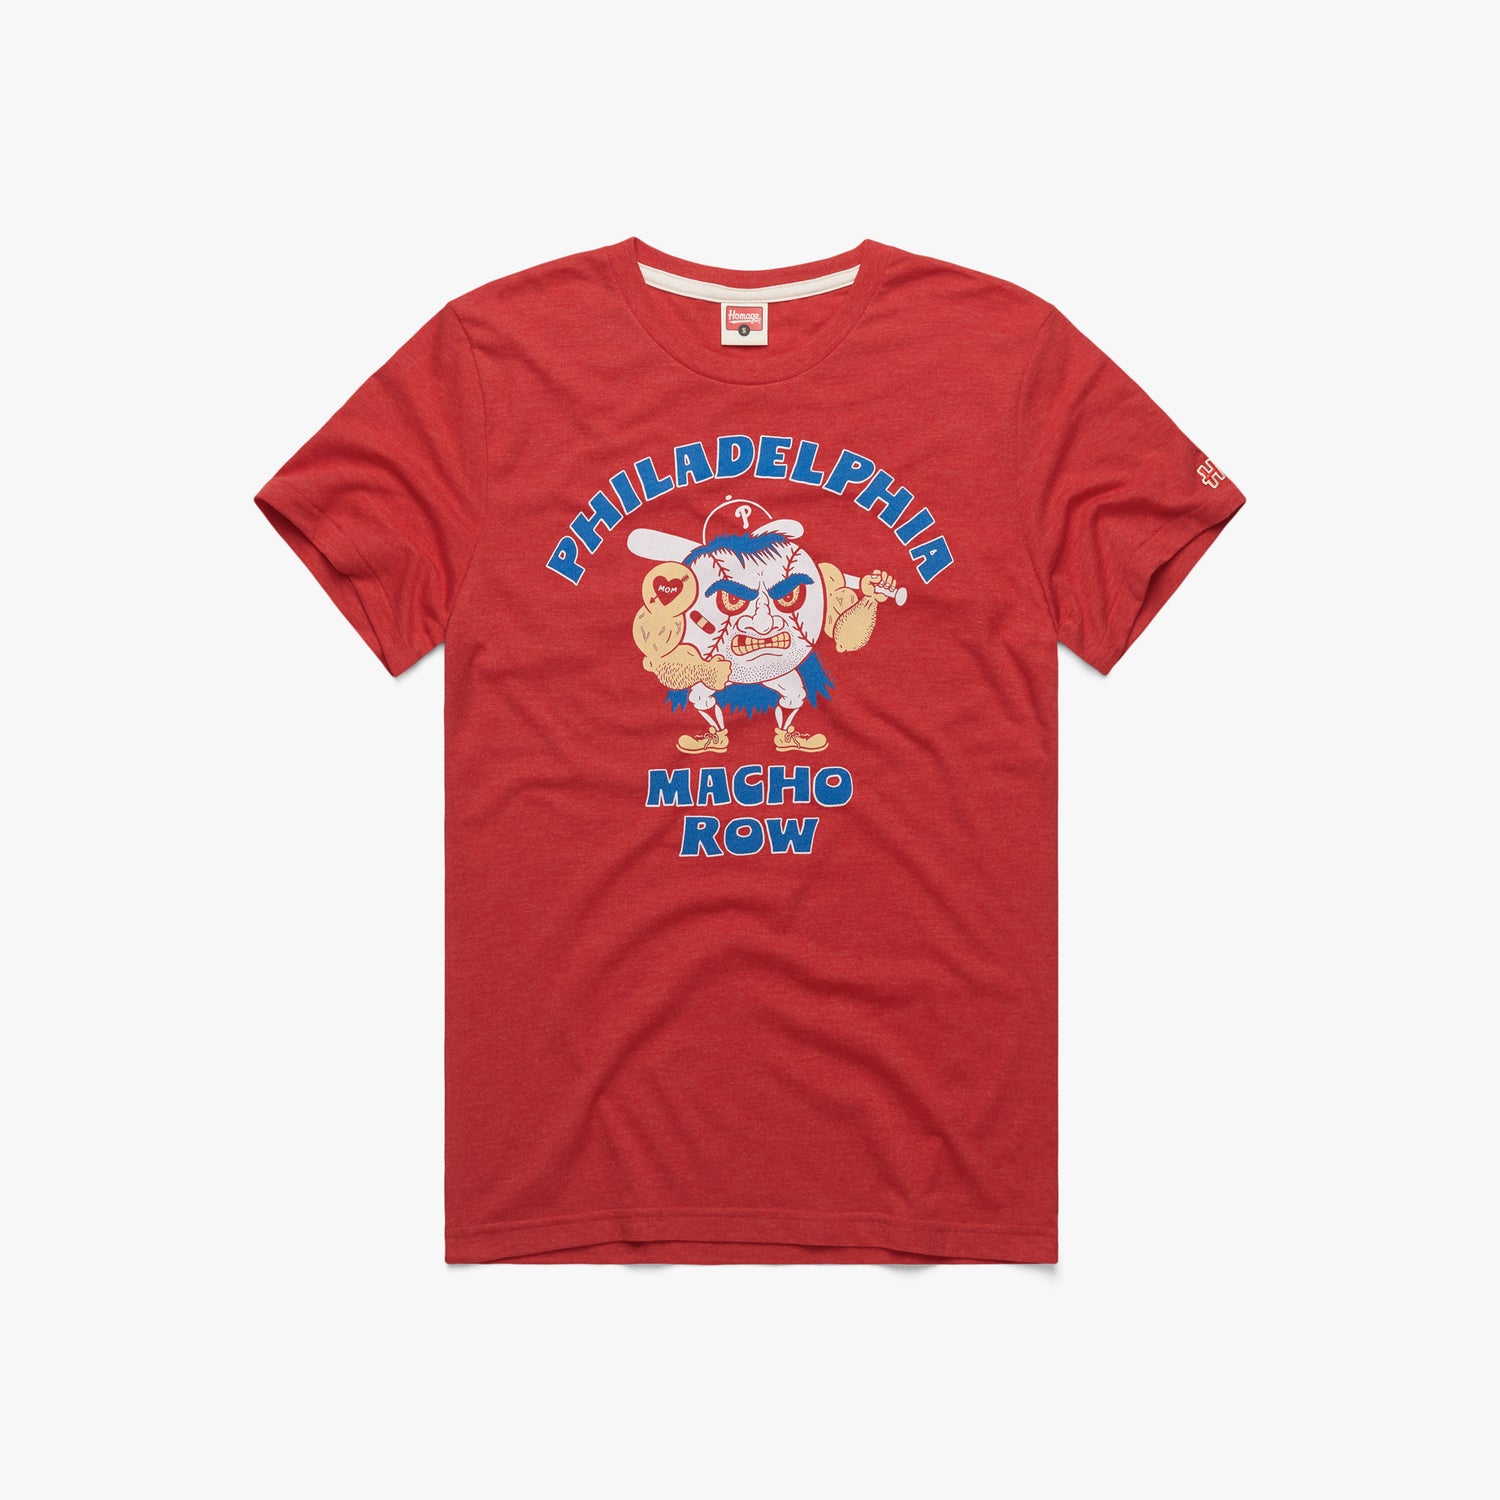 Macho Row Philadelphia Phillies T-Shirt from Homage. | Red | Vintage Apparel from Homage.